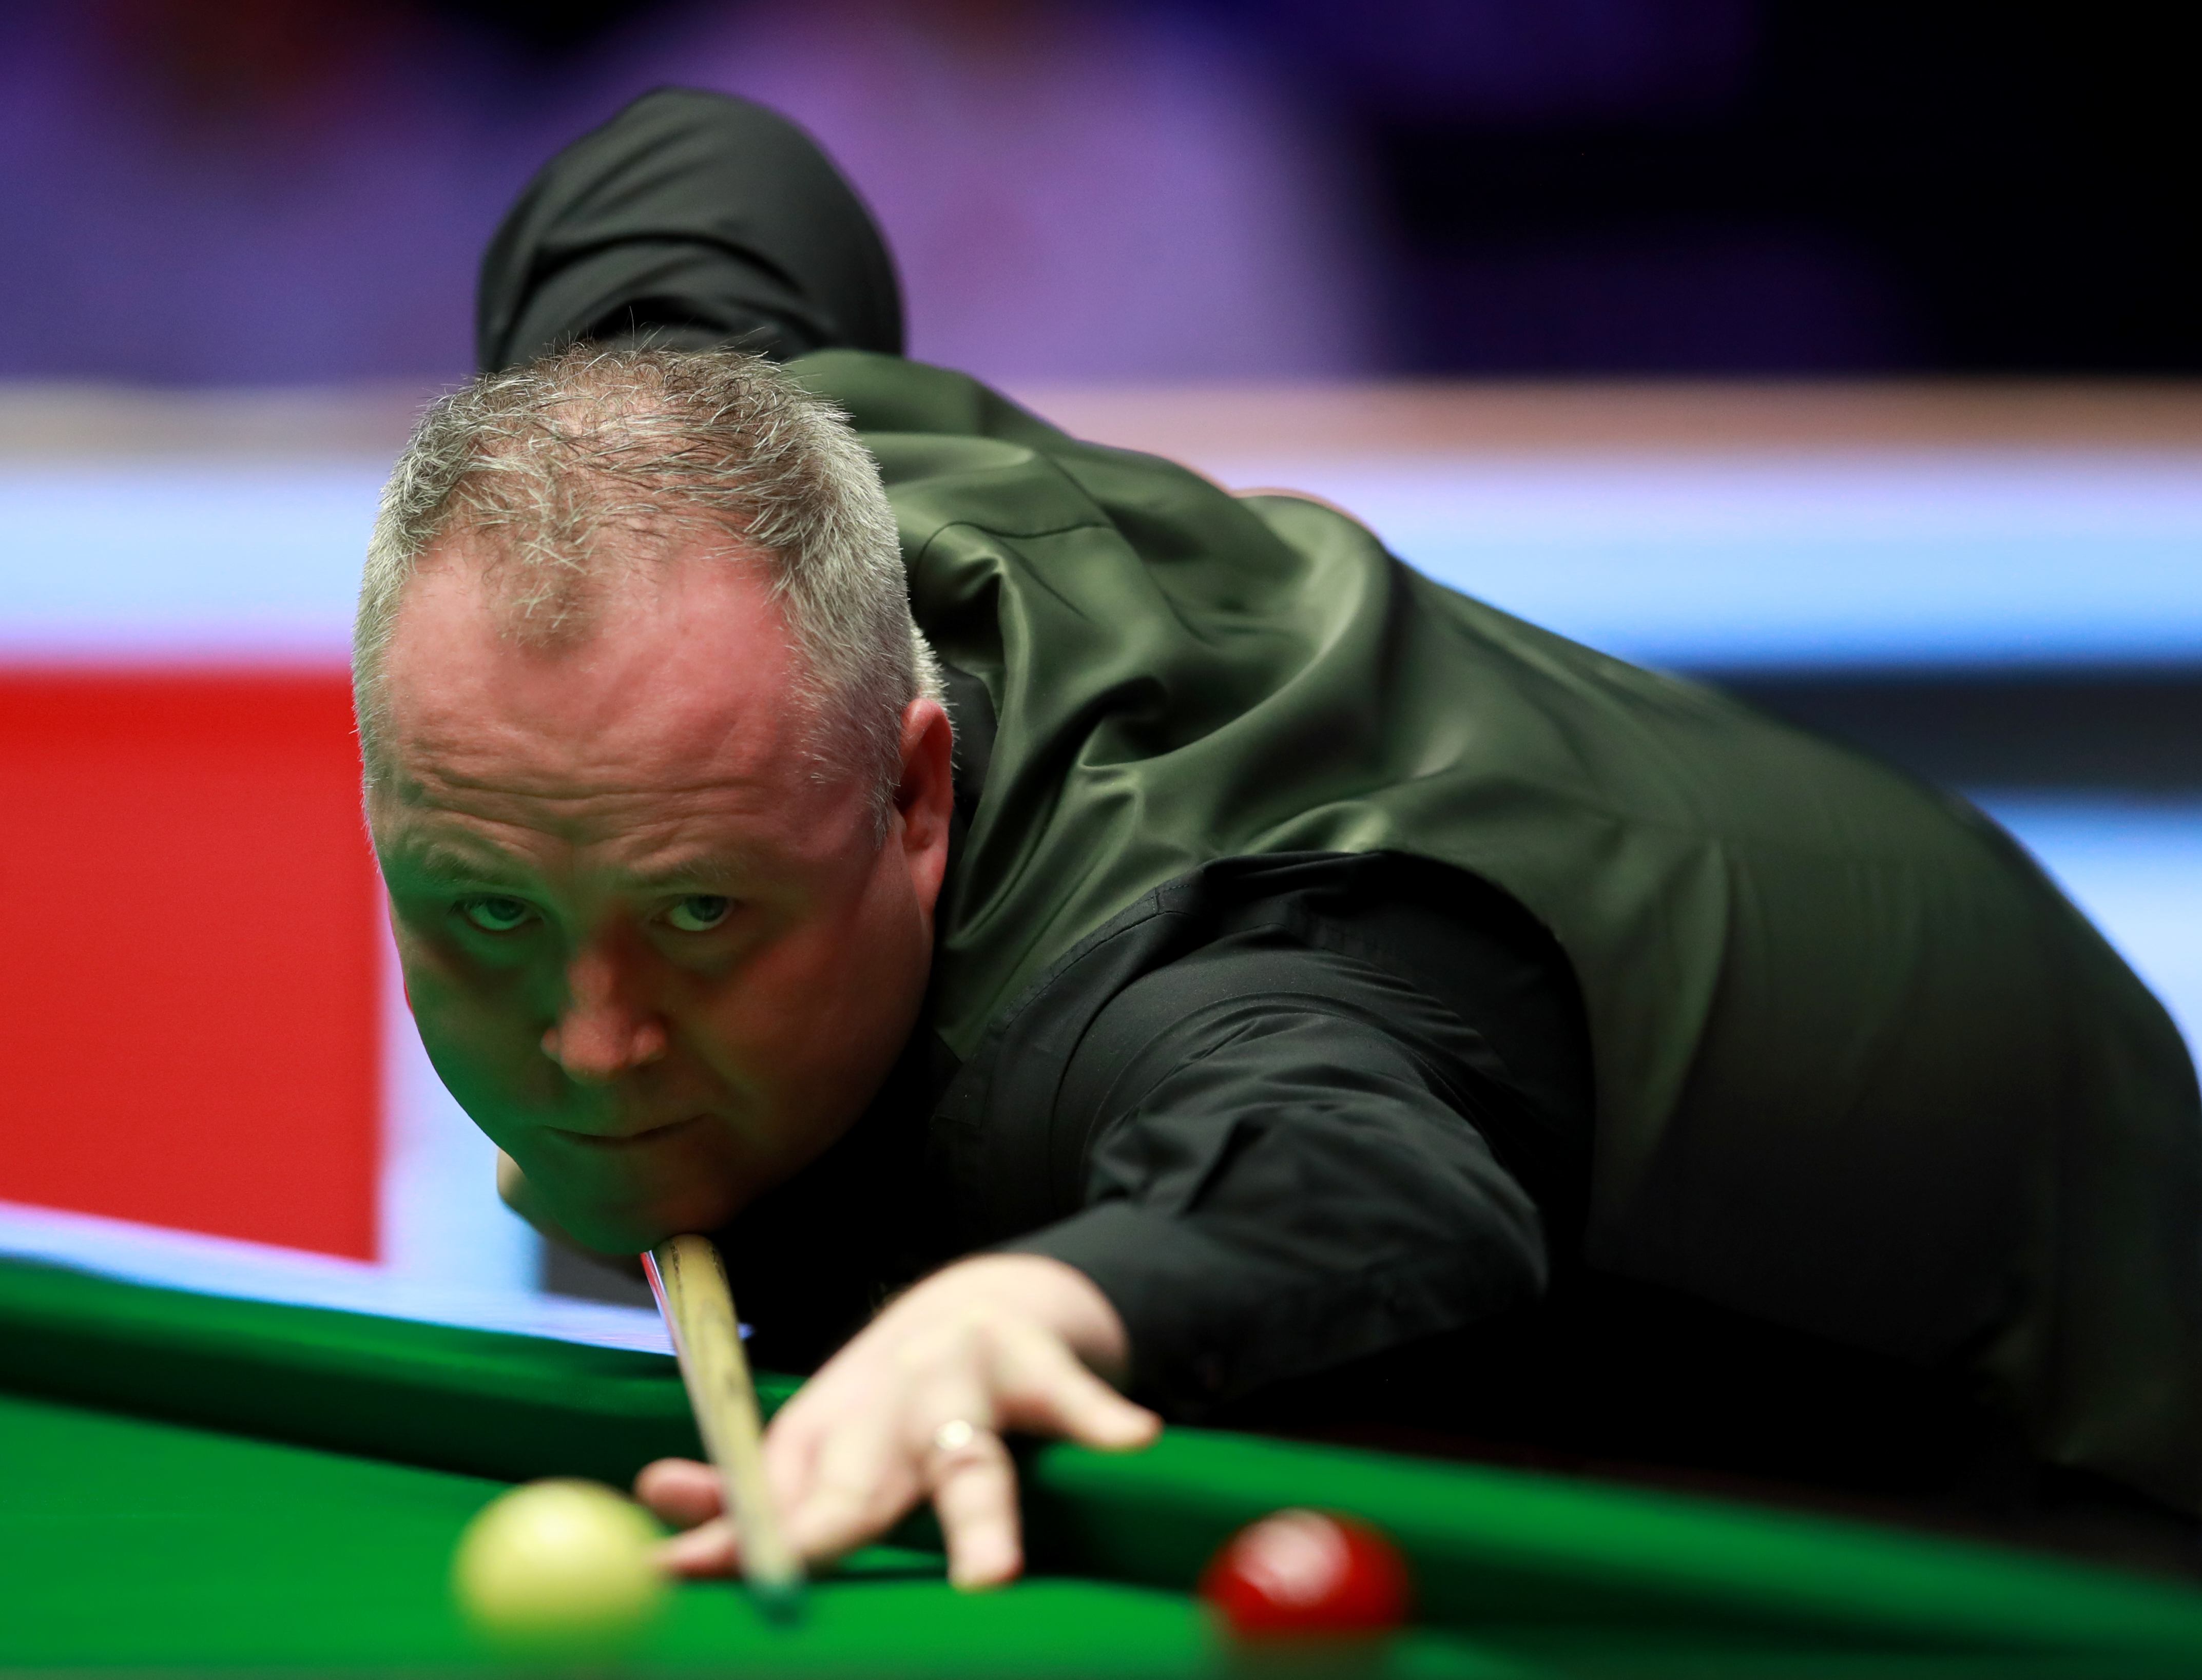 John Higgins vows to put heart and soul into quest for fifth world title NewsChain